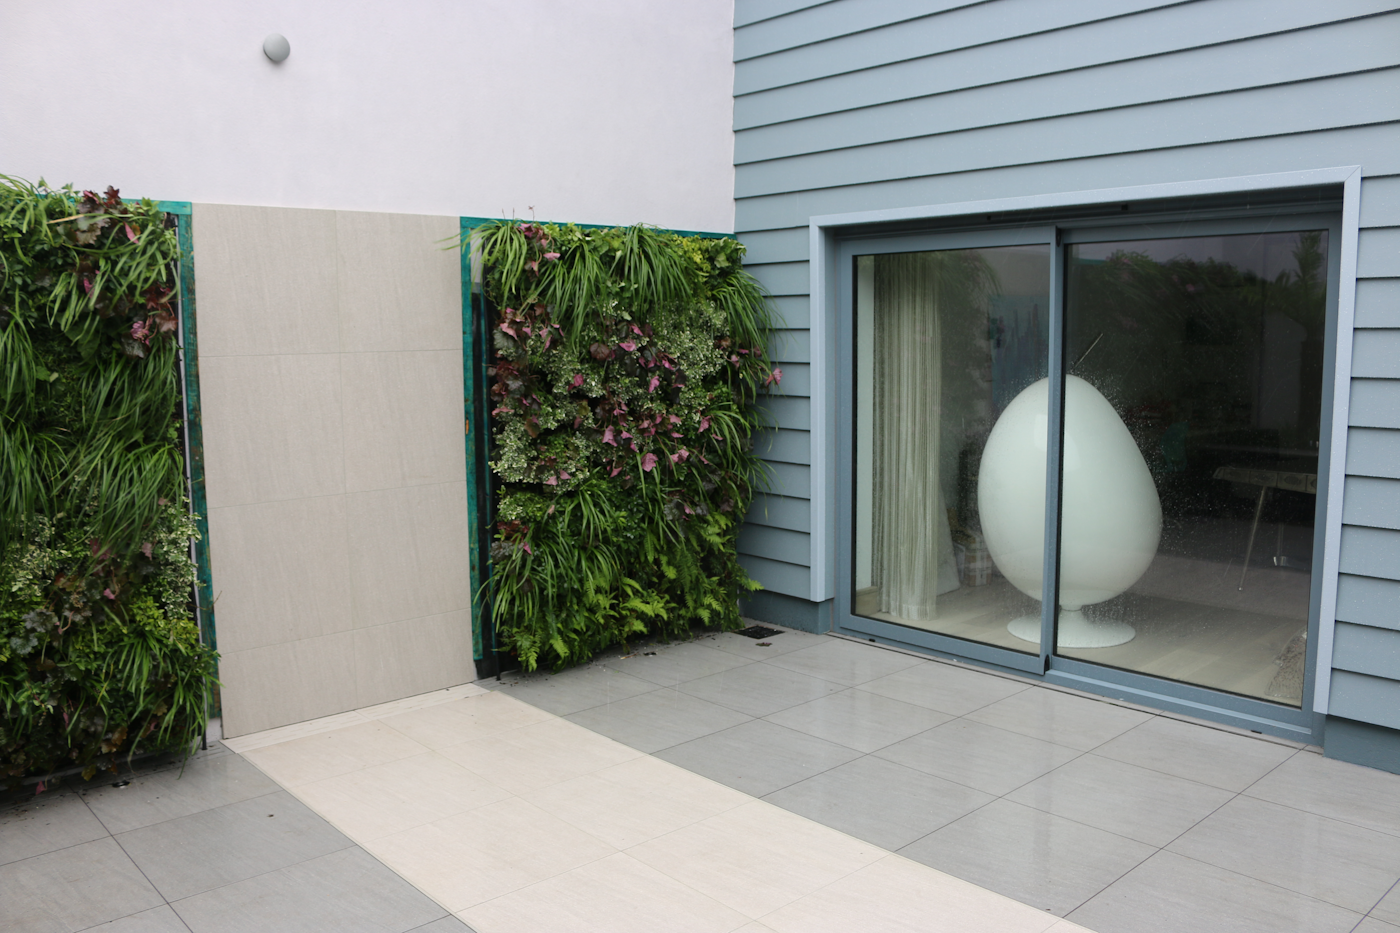 Two Living Walls At A Home In Jersey, Creating A Welcoming Patio Area